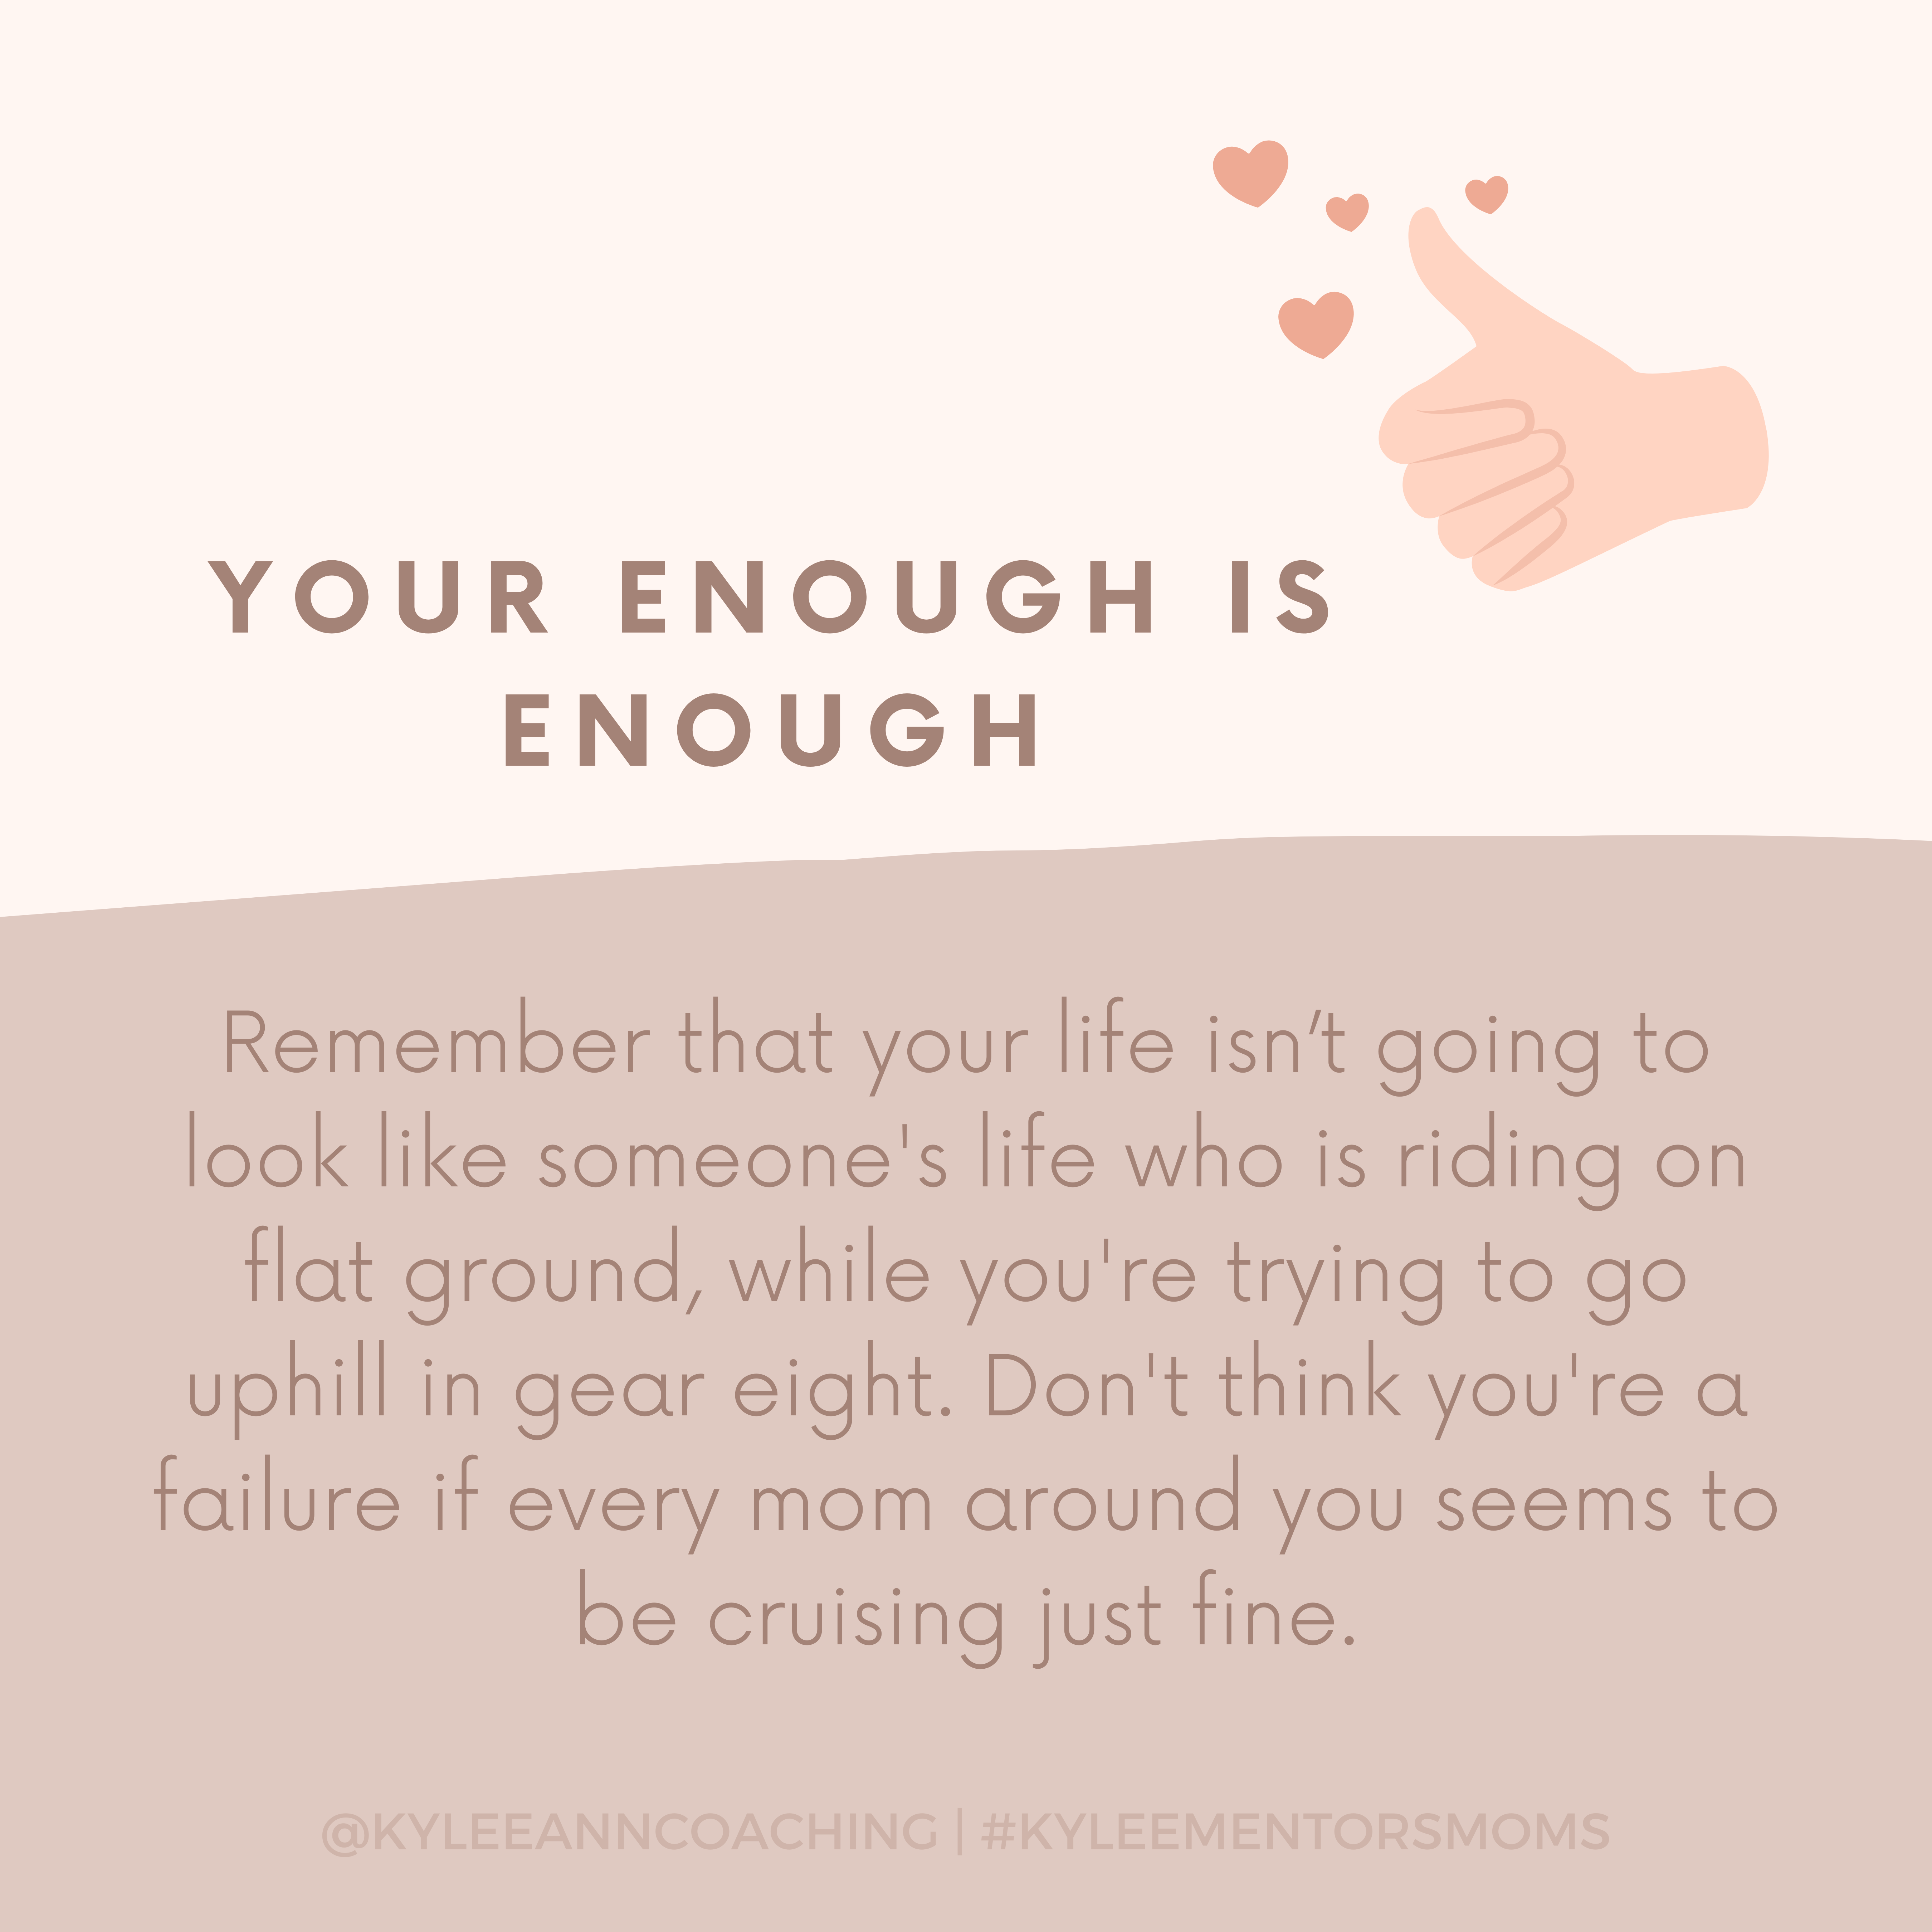 Your Enough is Enough